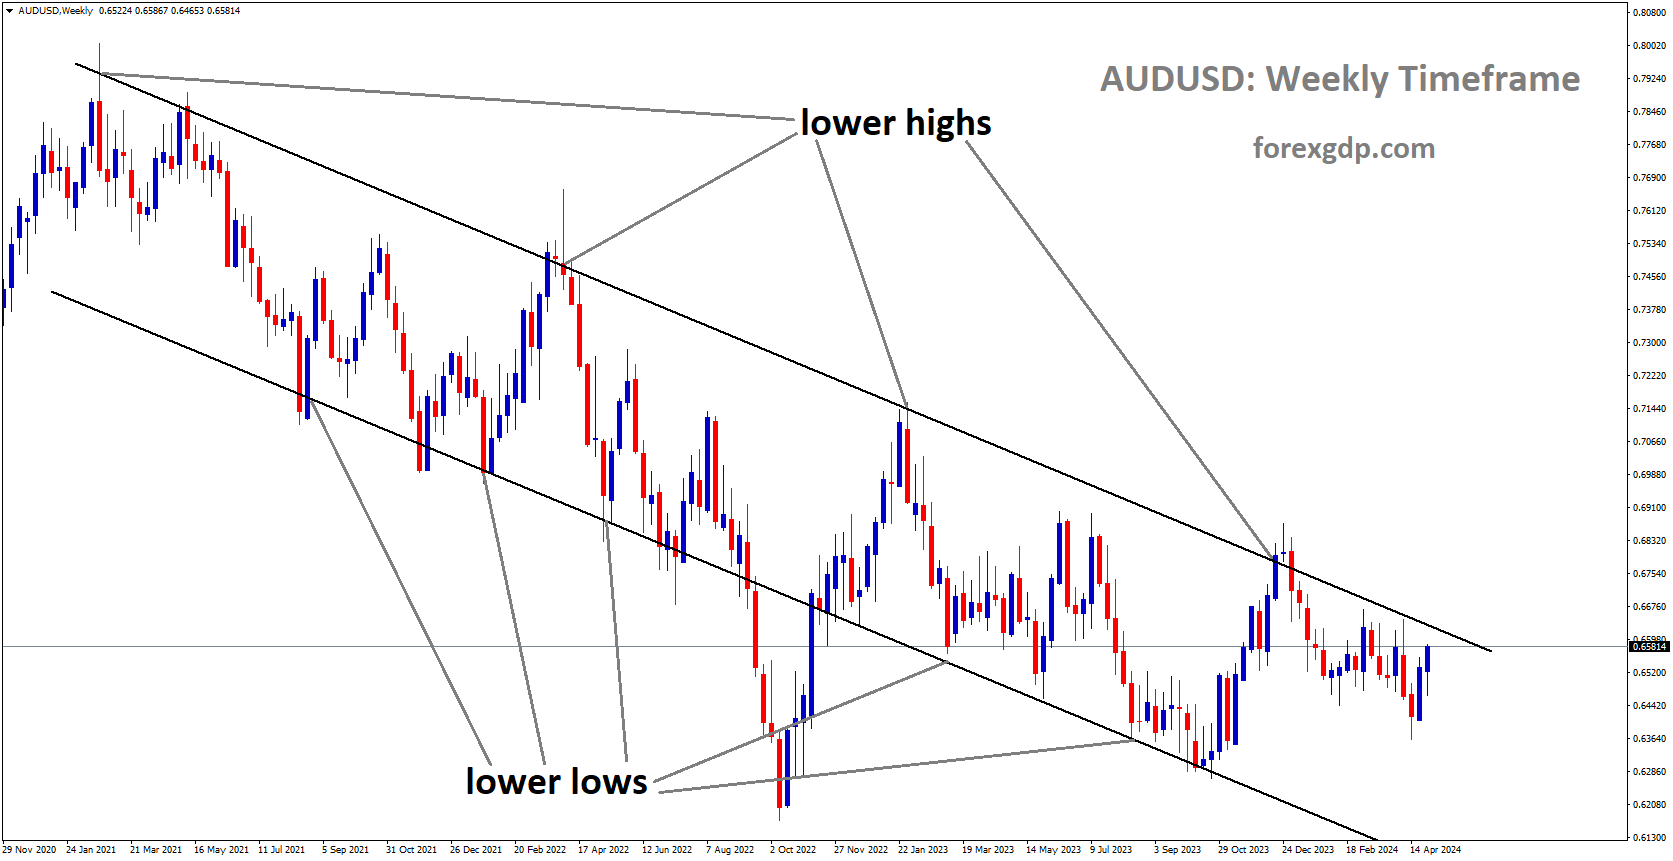 AUDUSD is moving in Descending channel and market has reached lower high area of the channel